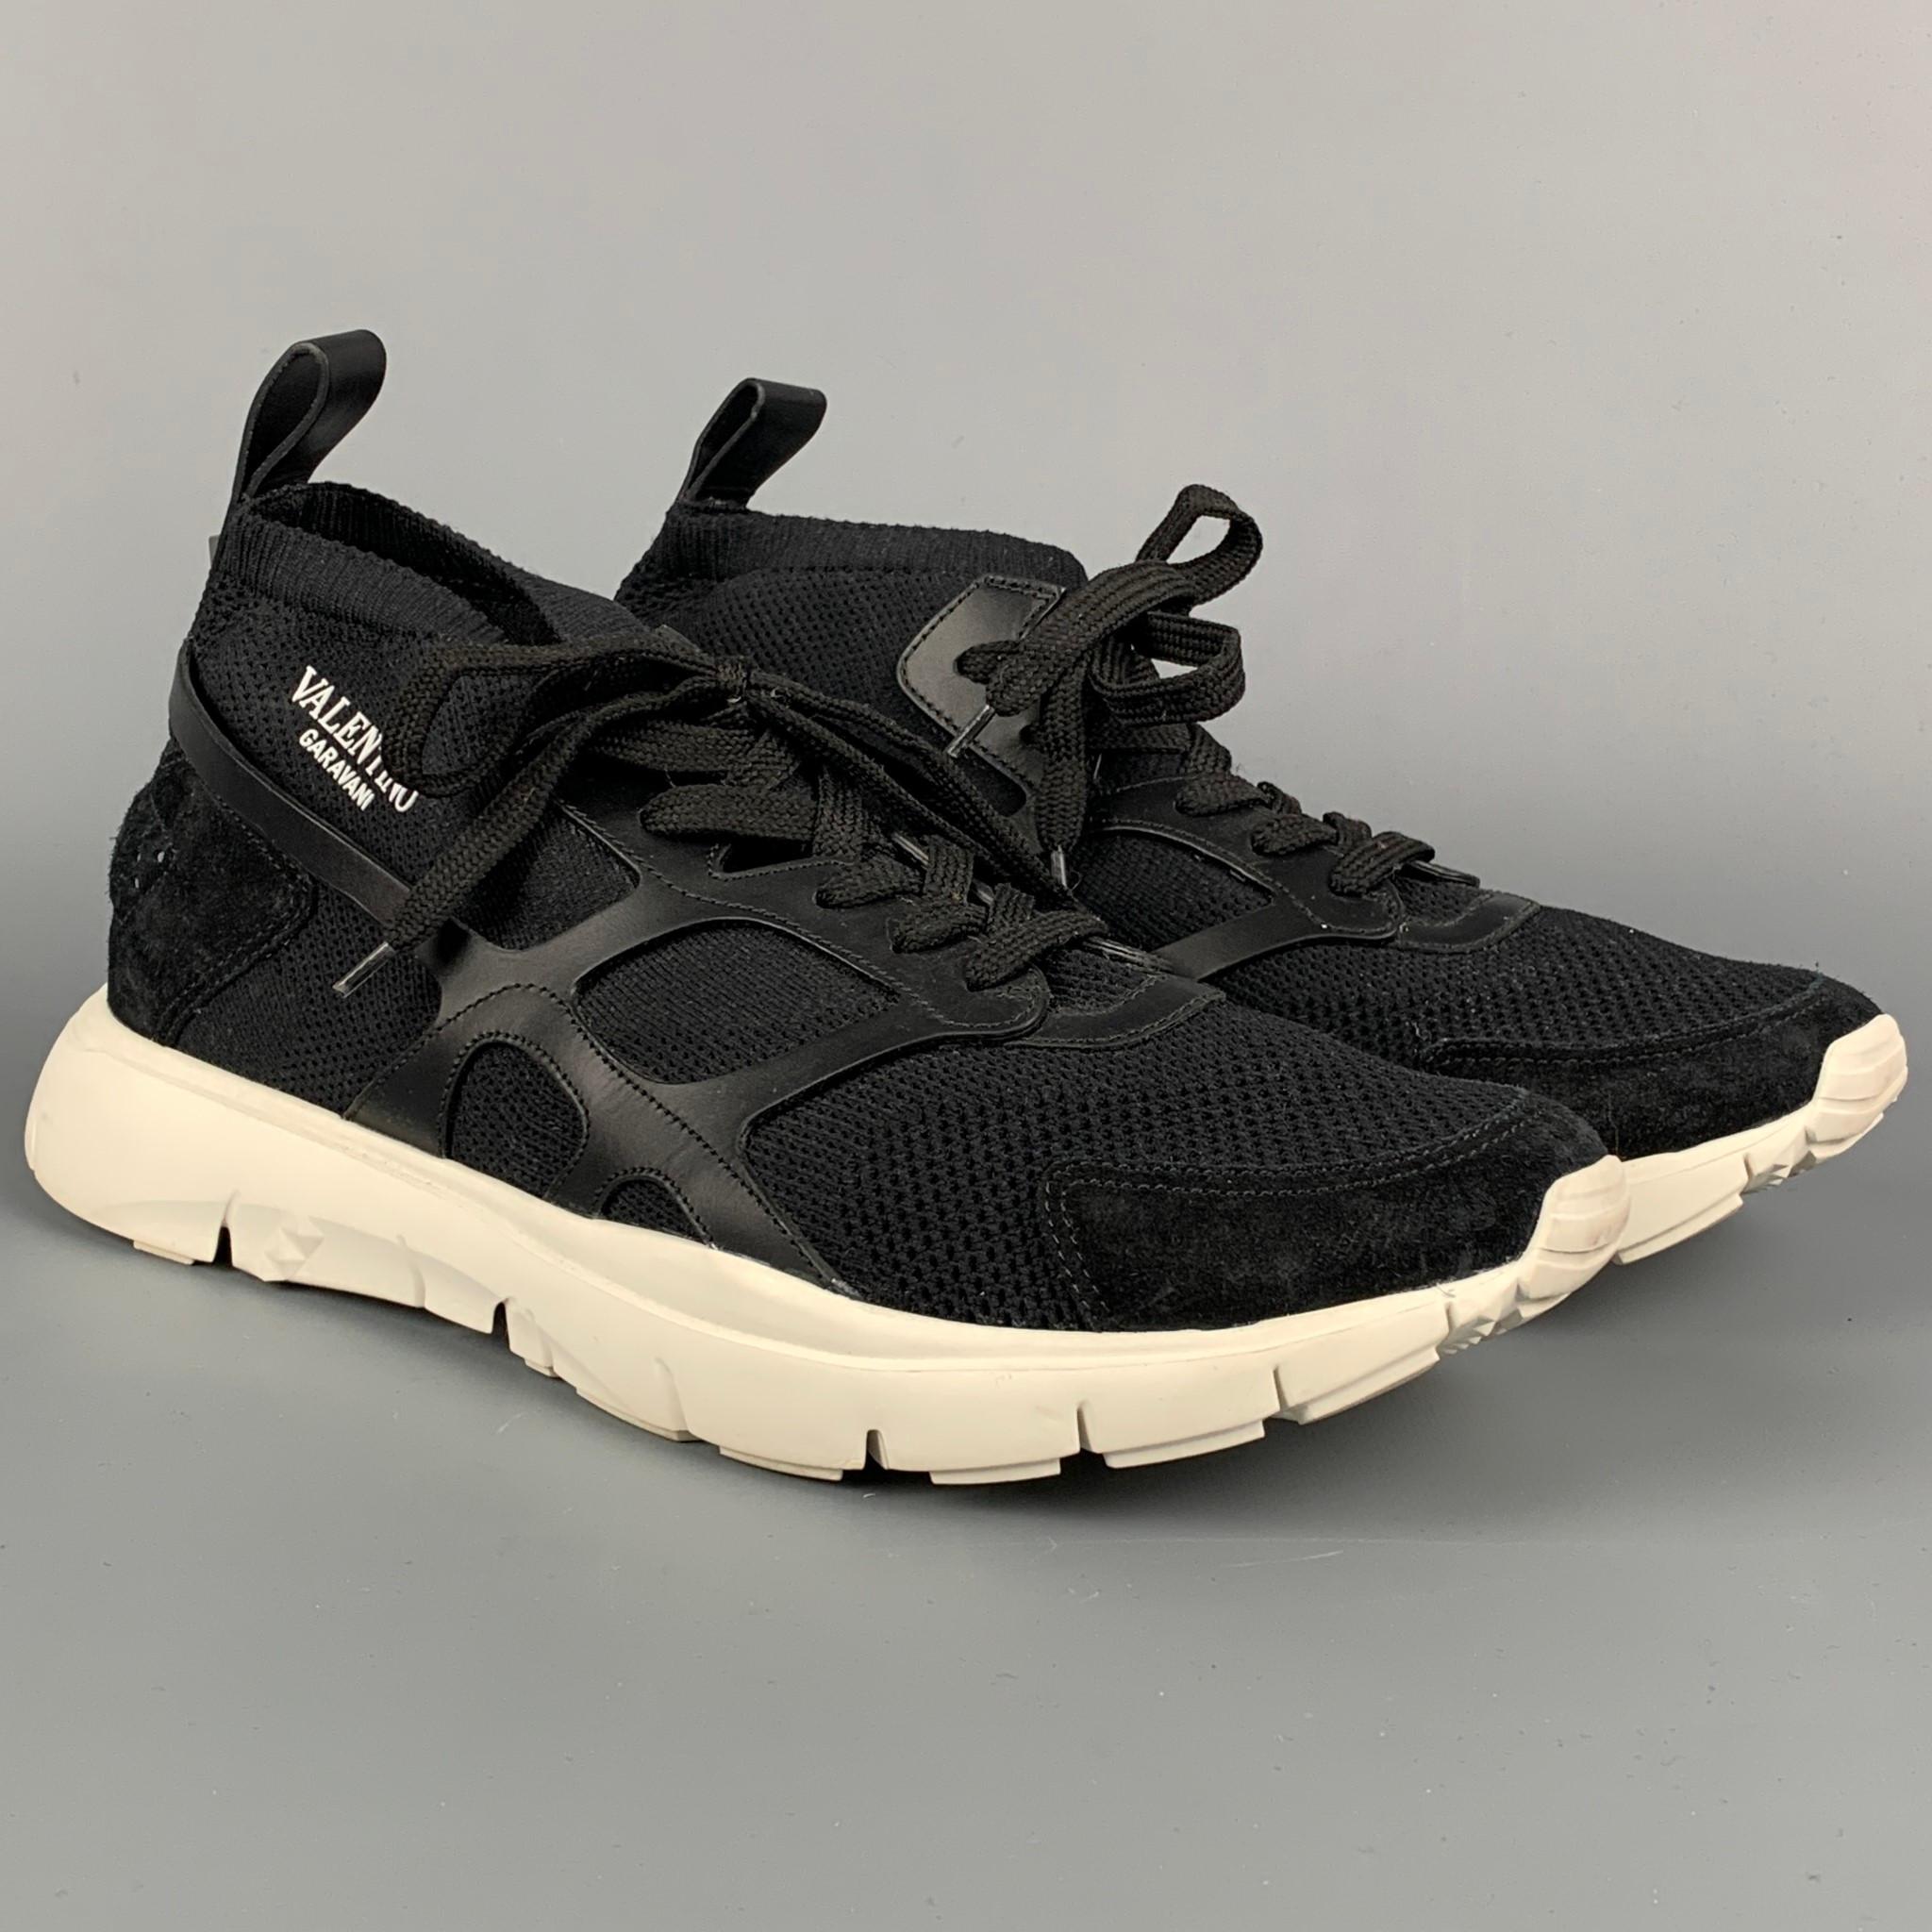 VALENTINO sneakers comes in a black mesh material with leather trim featuring featuring  slip on style, rubber sole, and a lace up closure. Made in Italy. 

Very Good Pre-Owned Condition.
Marked: TPA57Y0 45

Outsole: 13 in. x 4.5 in. 